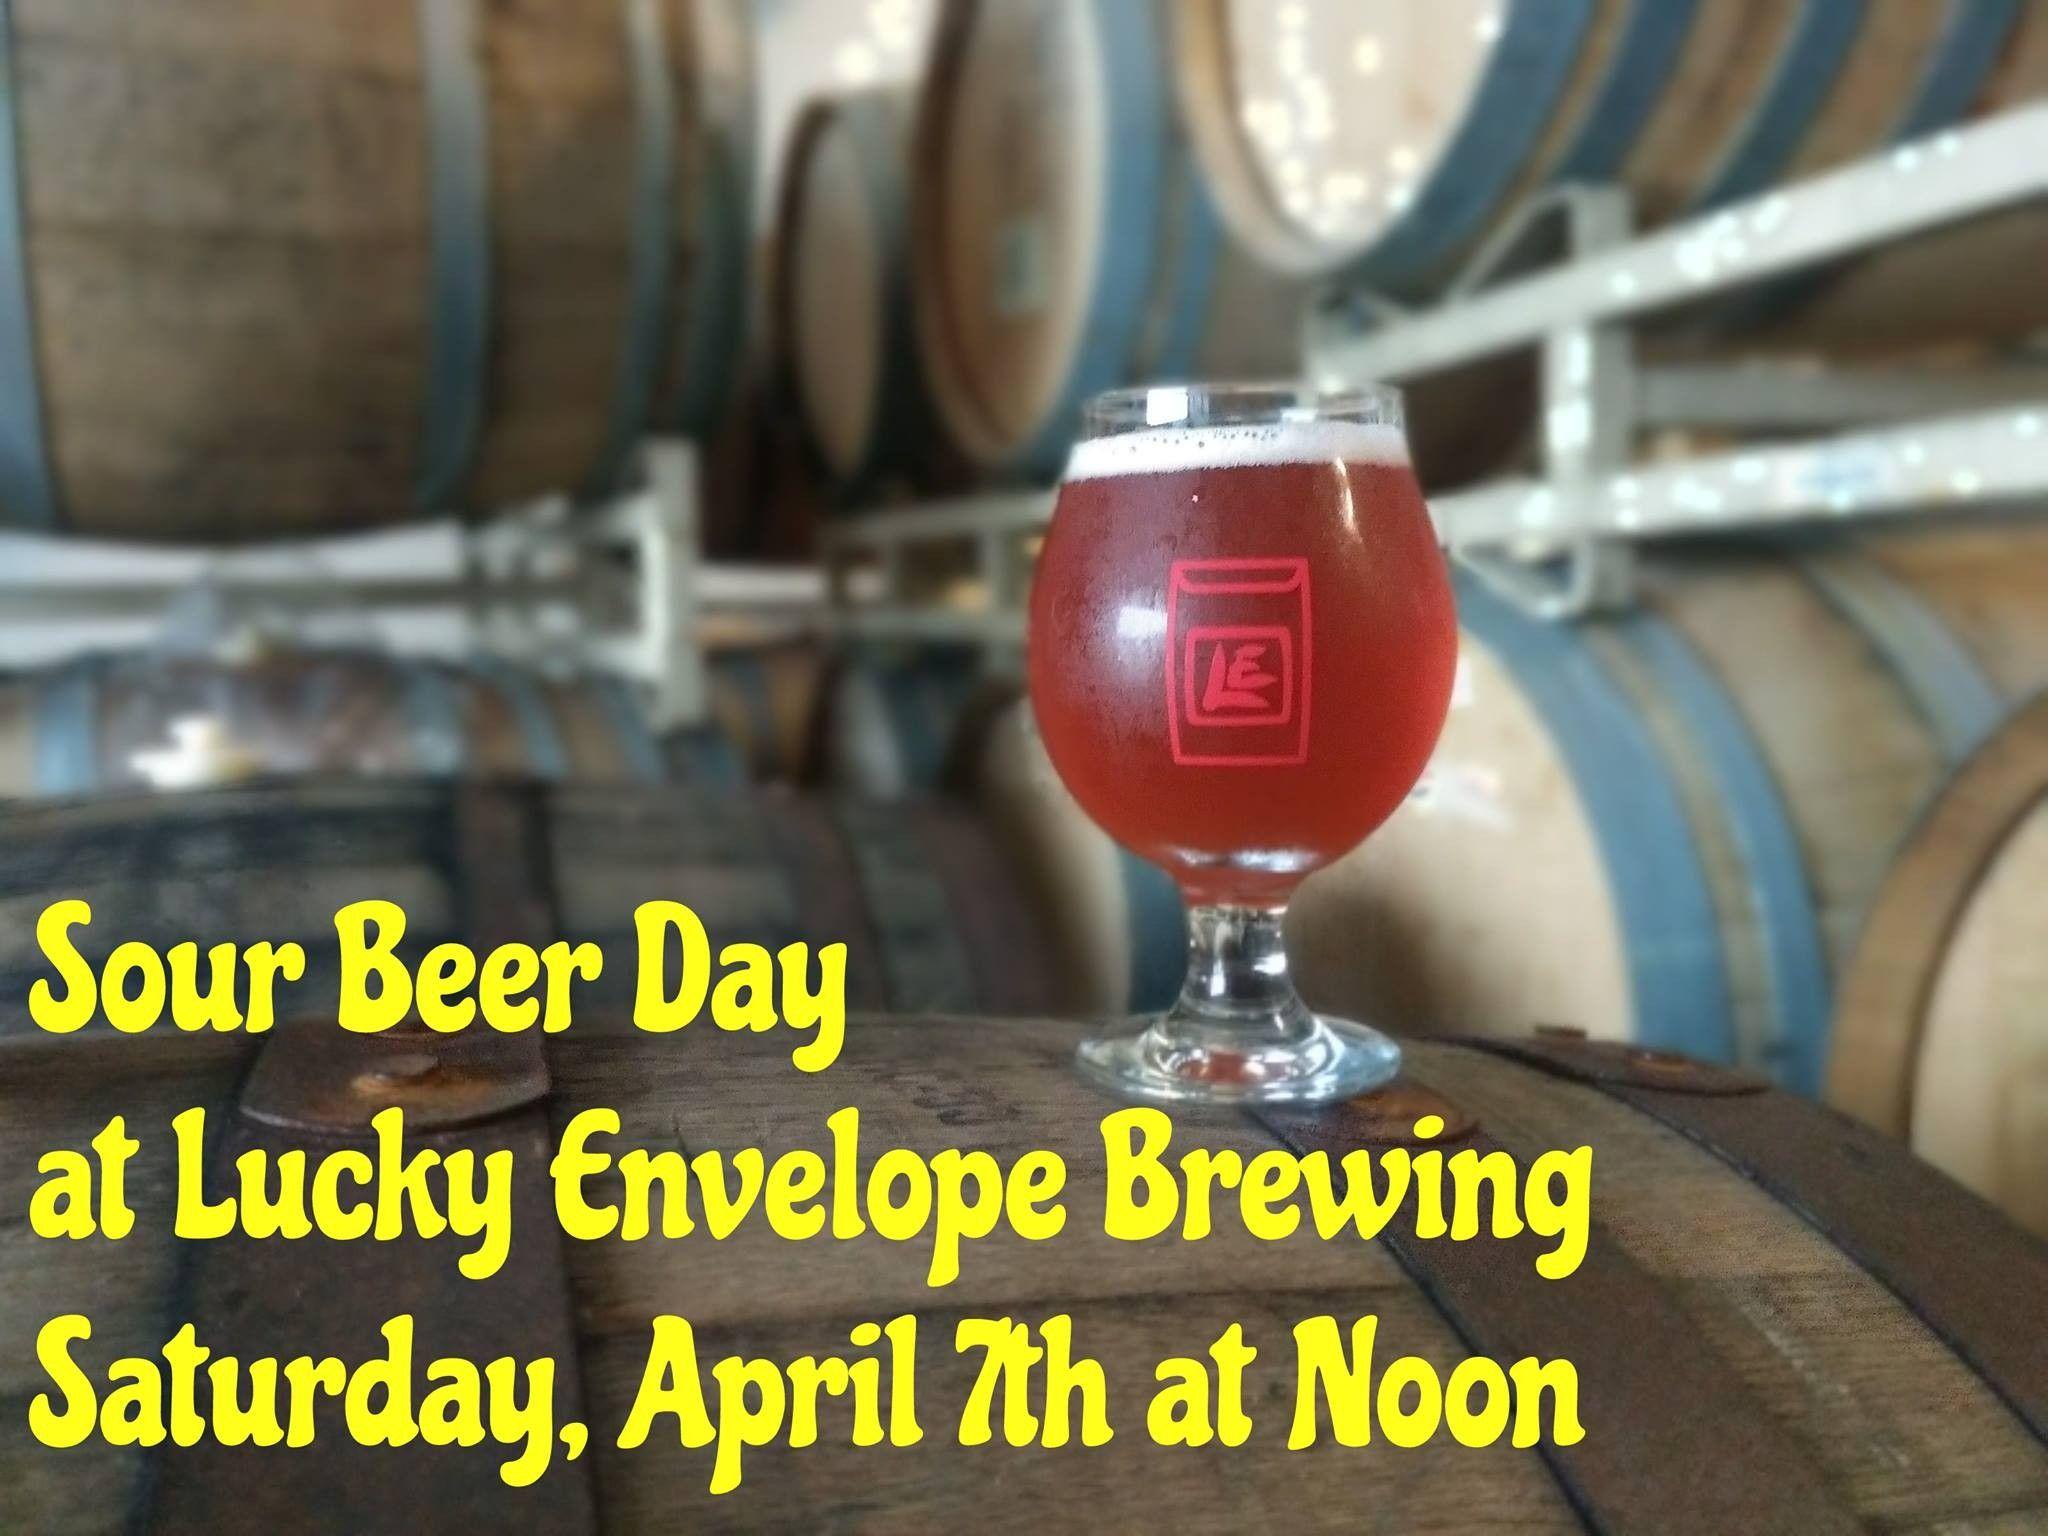 Sour Beer Day at Lucky Envelope Brewing in Seattle, WA on Sat